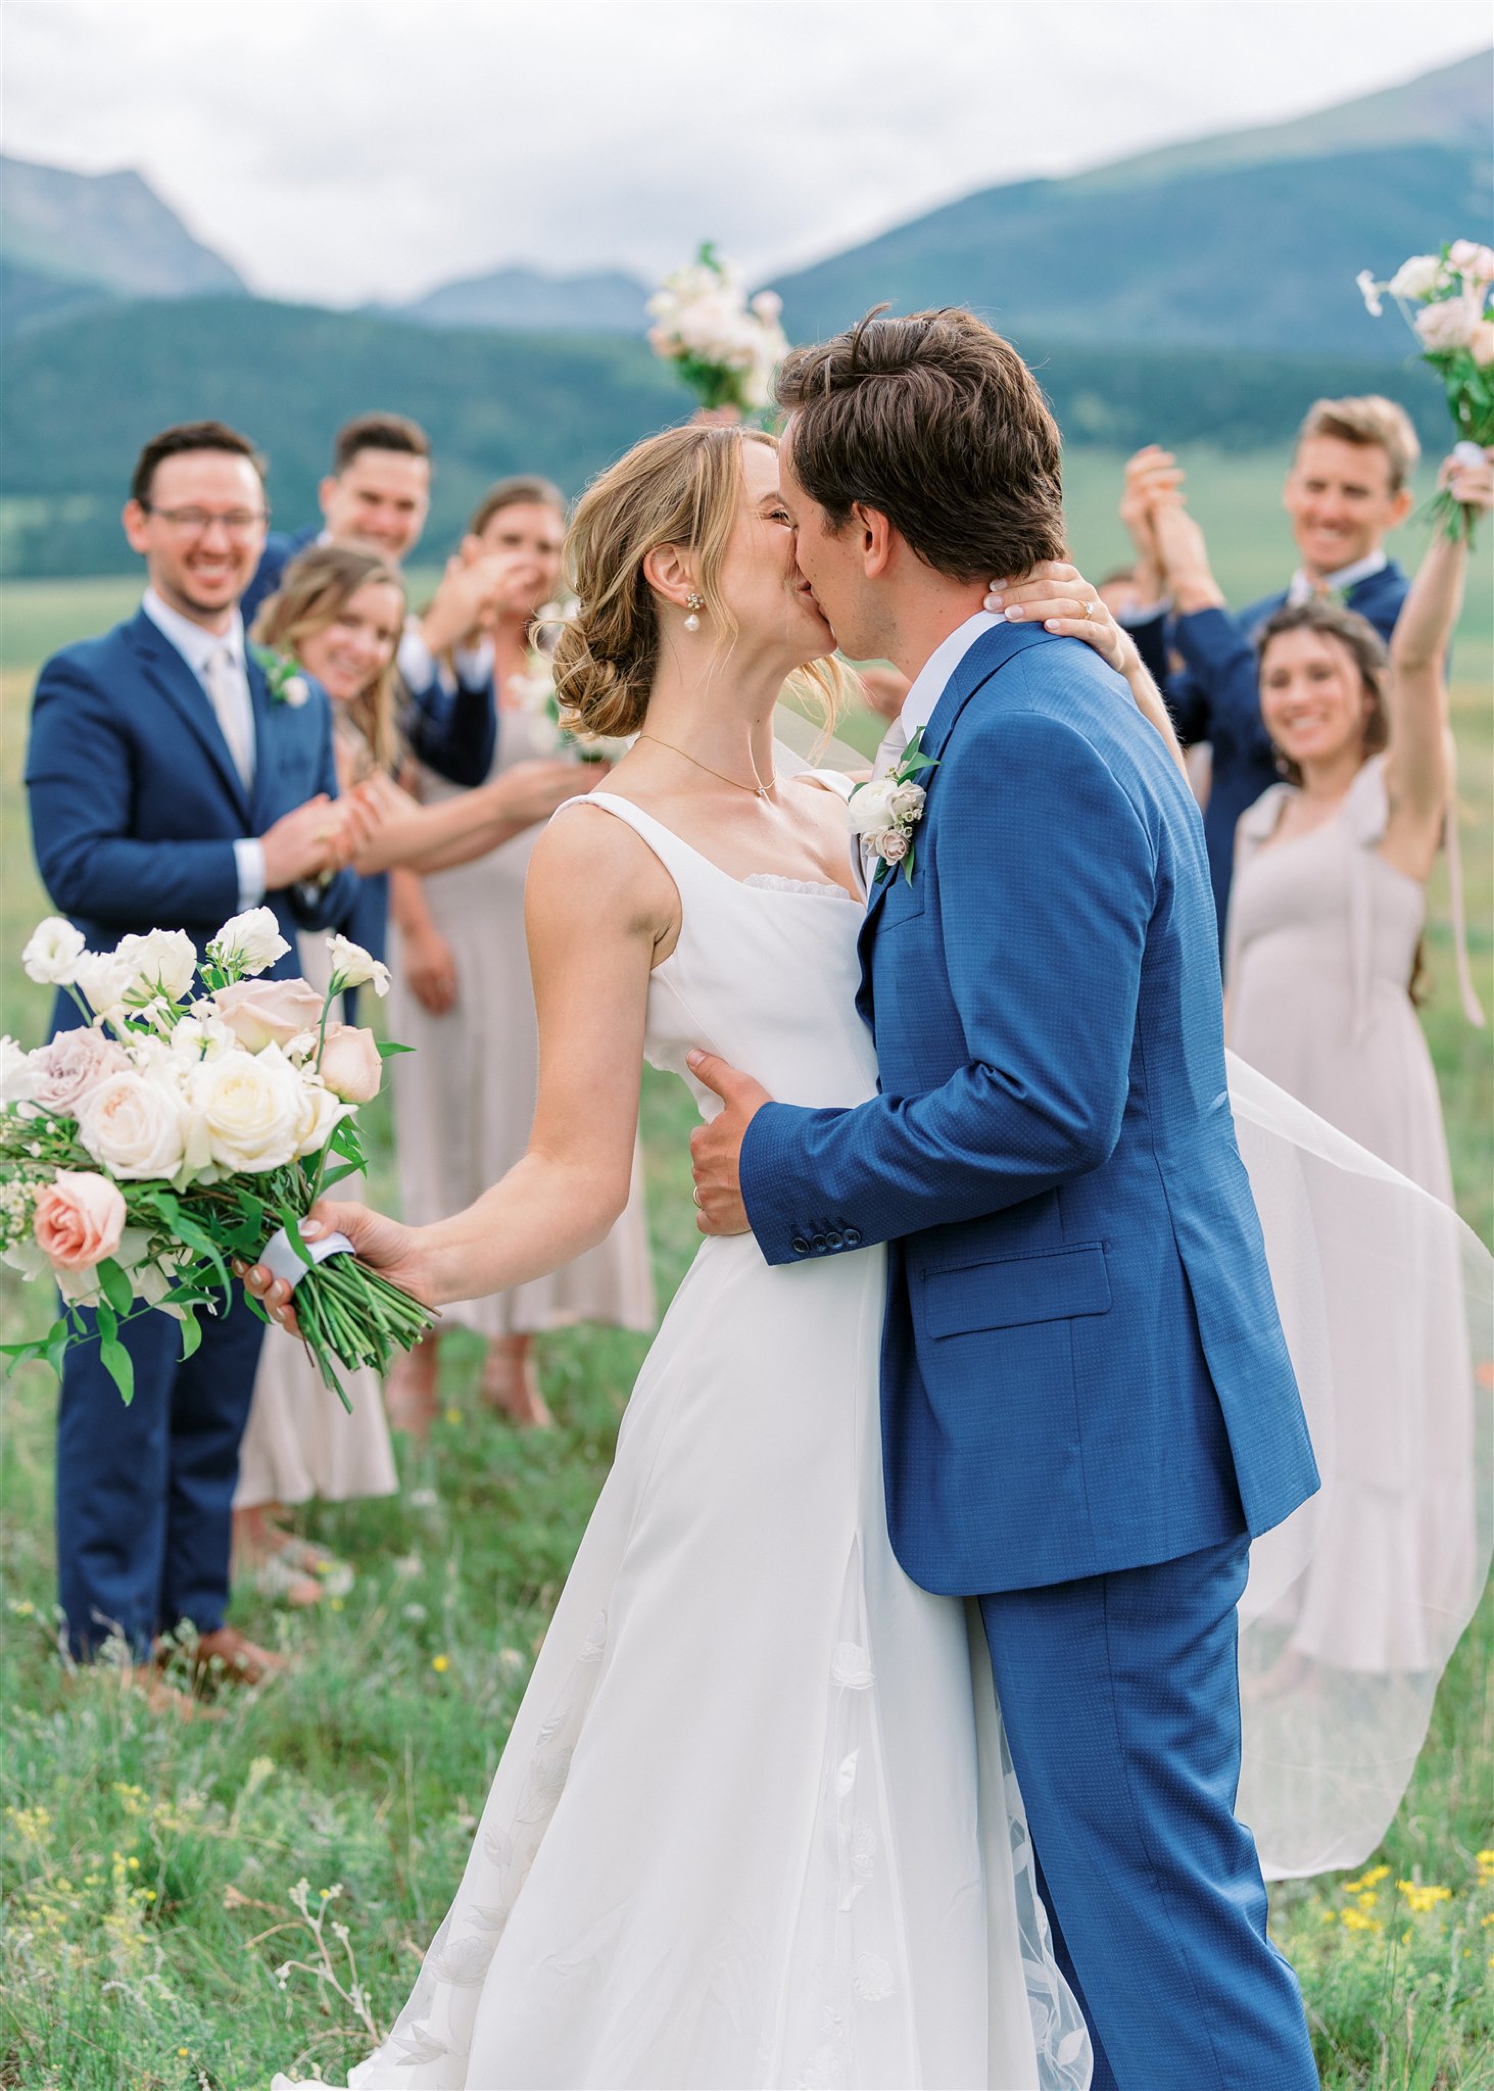 Bride and groom kissing while wedding party cheers | McArthur Weddings and Events
